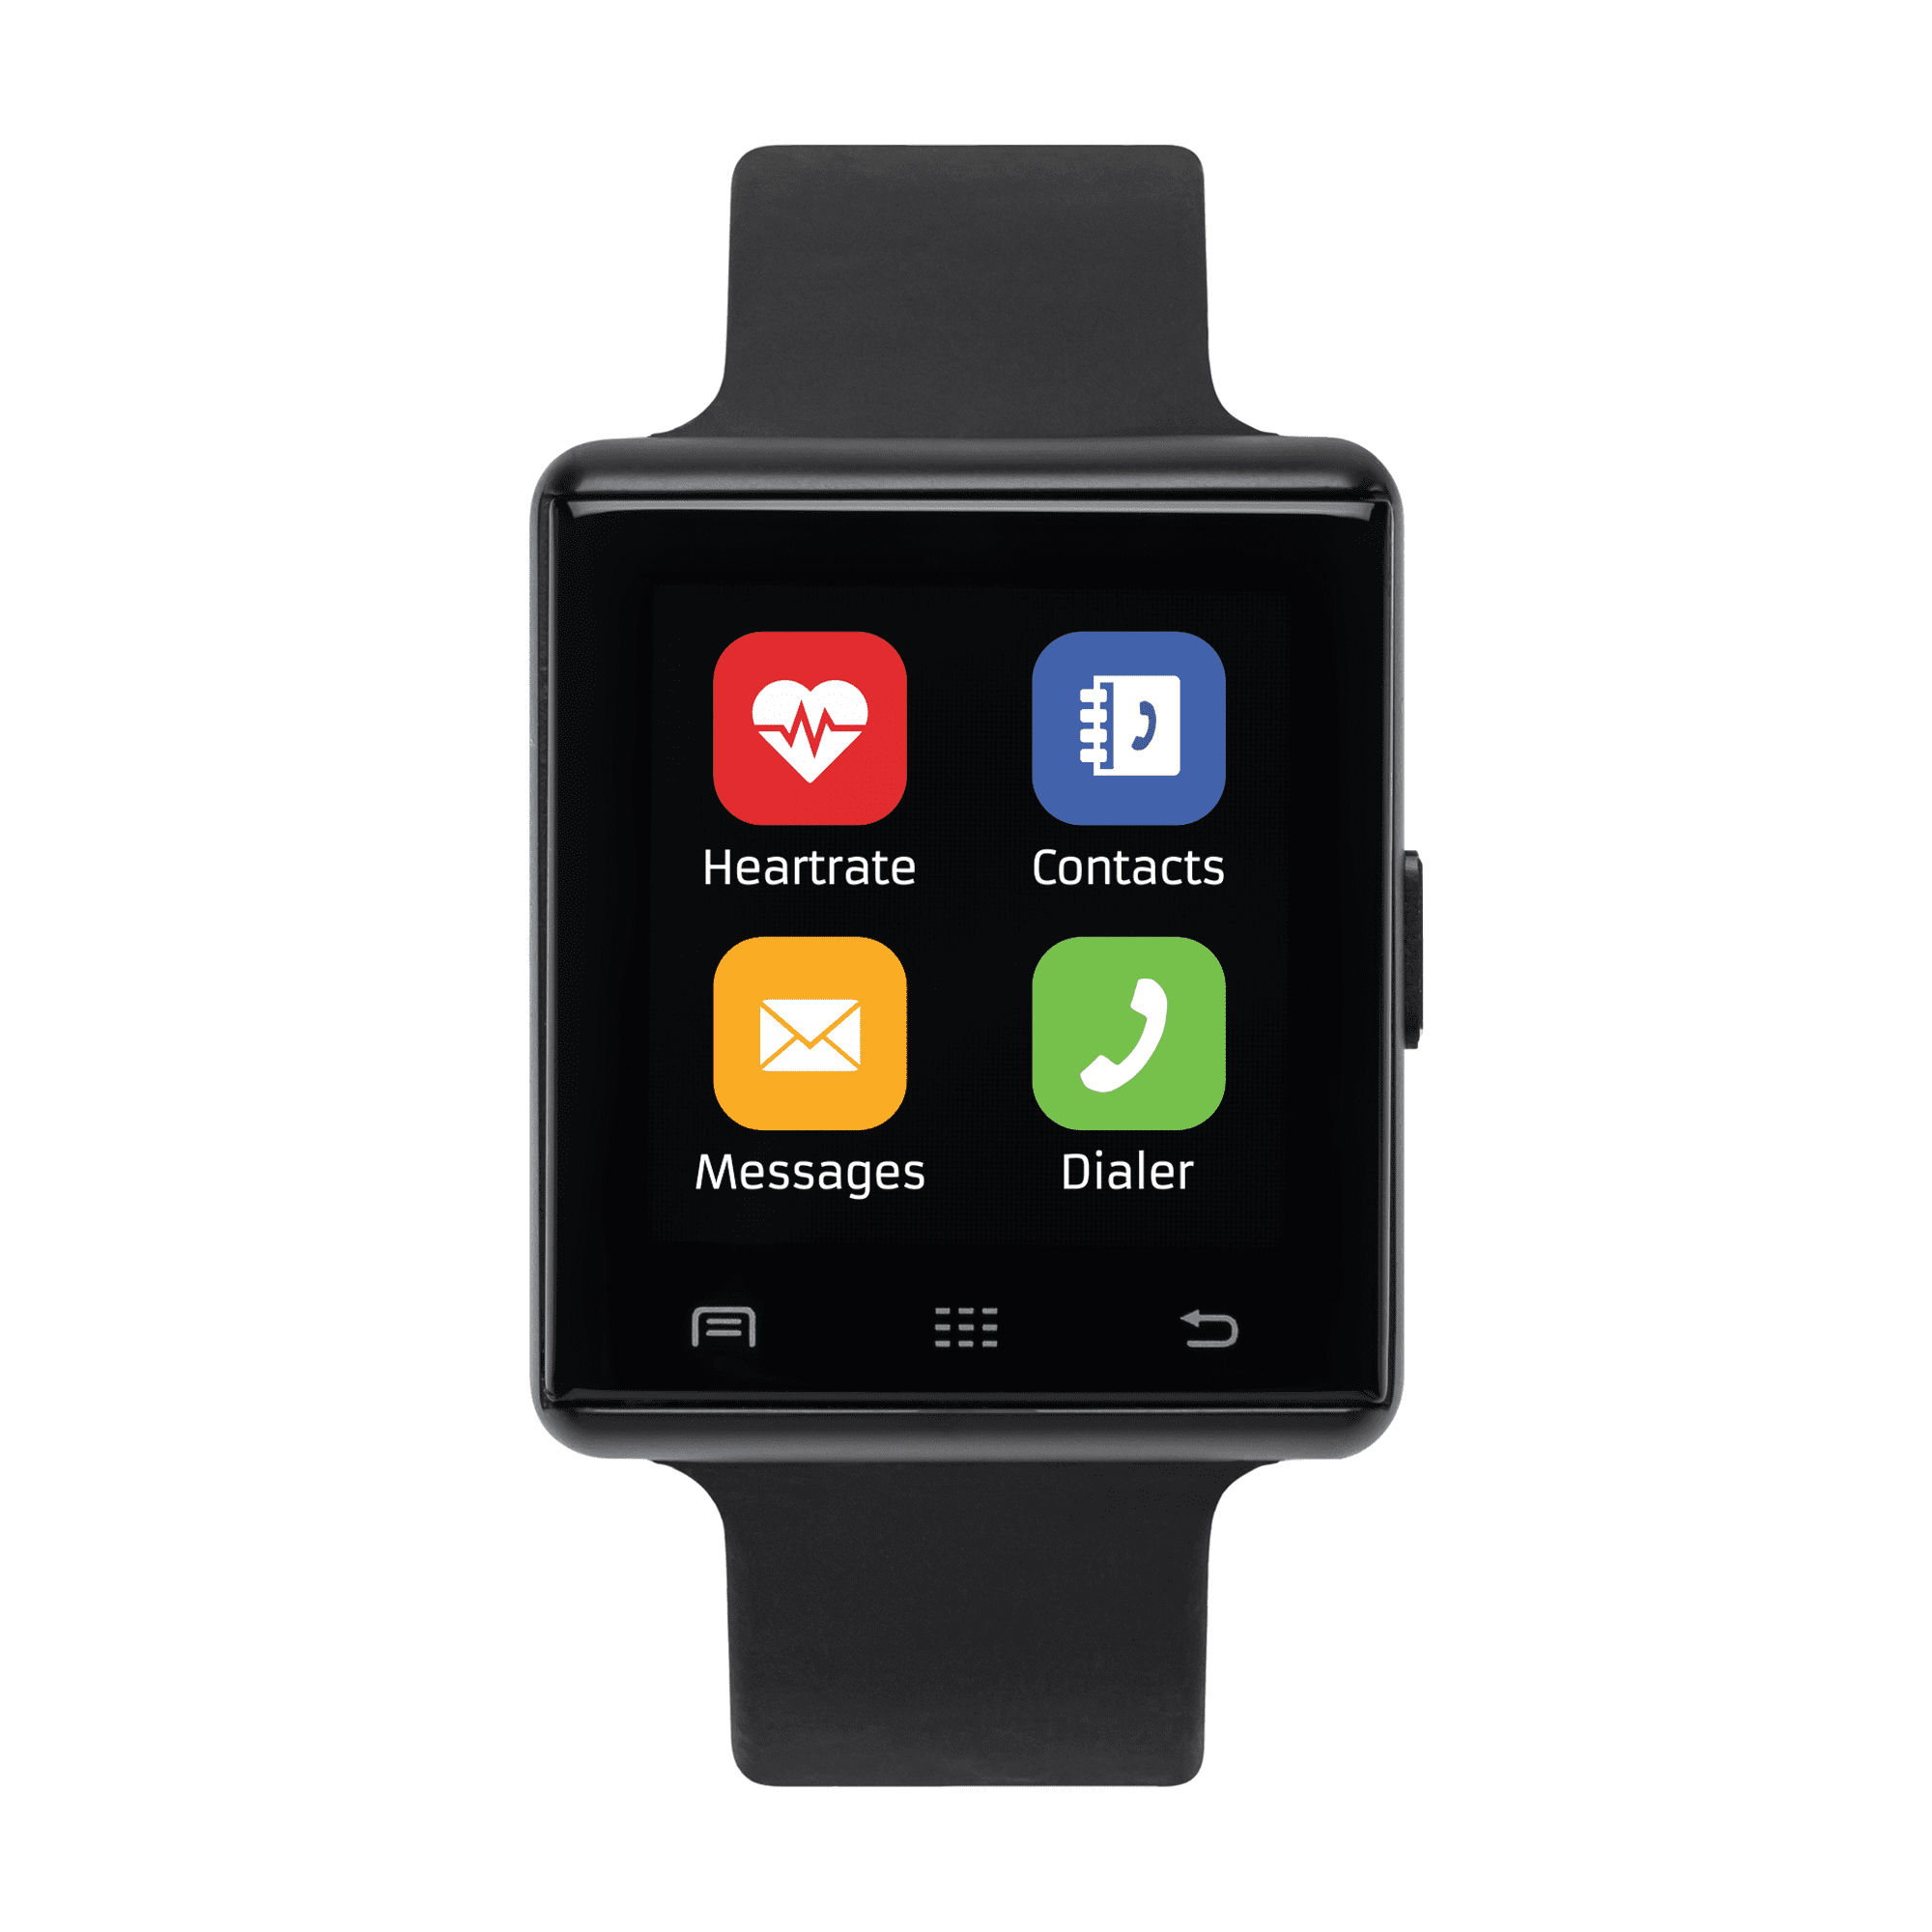 iTouch Air 2 Smartwatch 41mm Black Case with Black Strap - Walmart.com